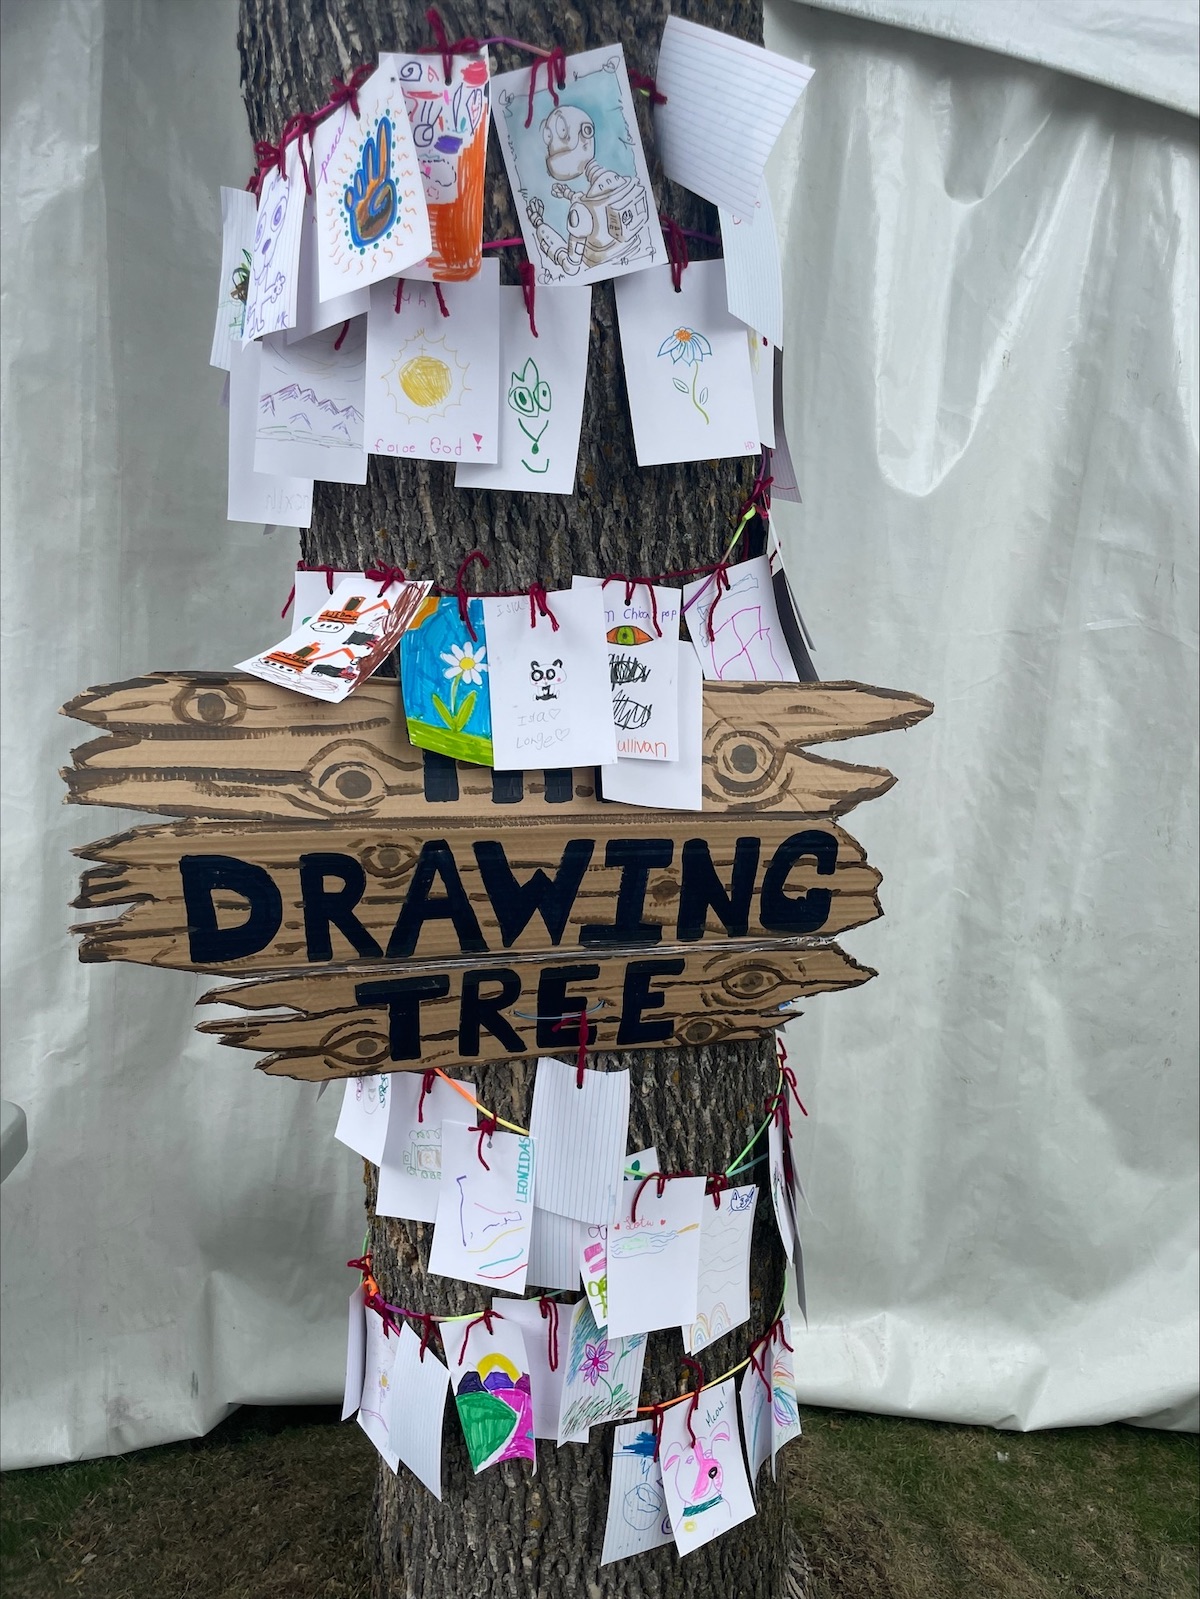 A tree with a sign Drawing Tree and small pictures hanging from it.